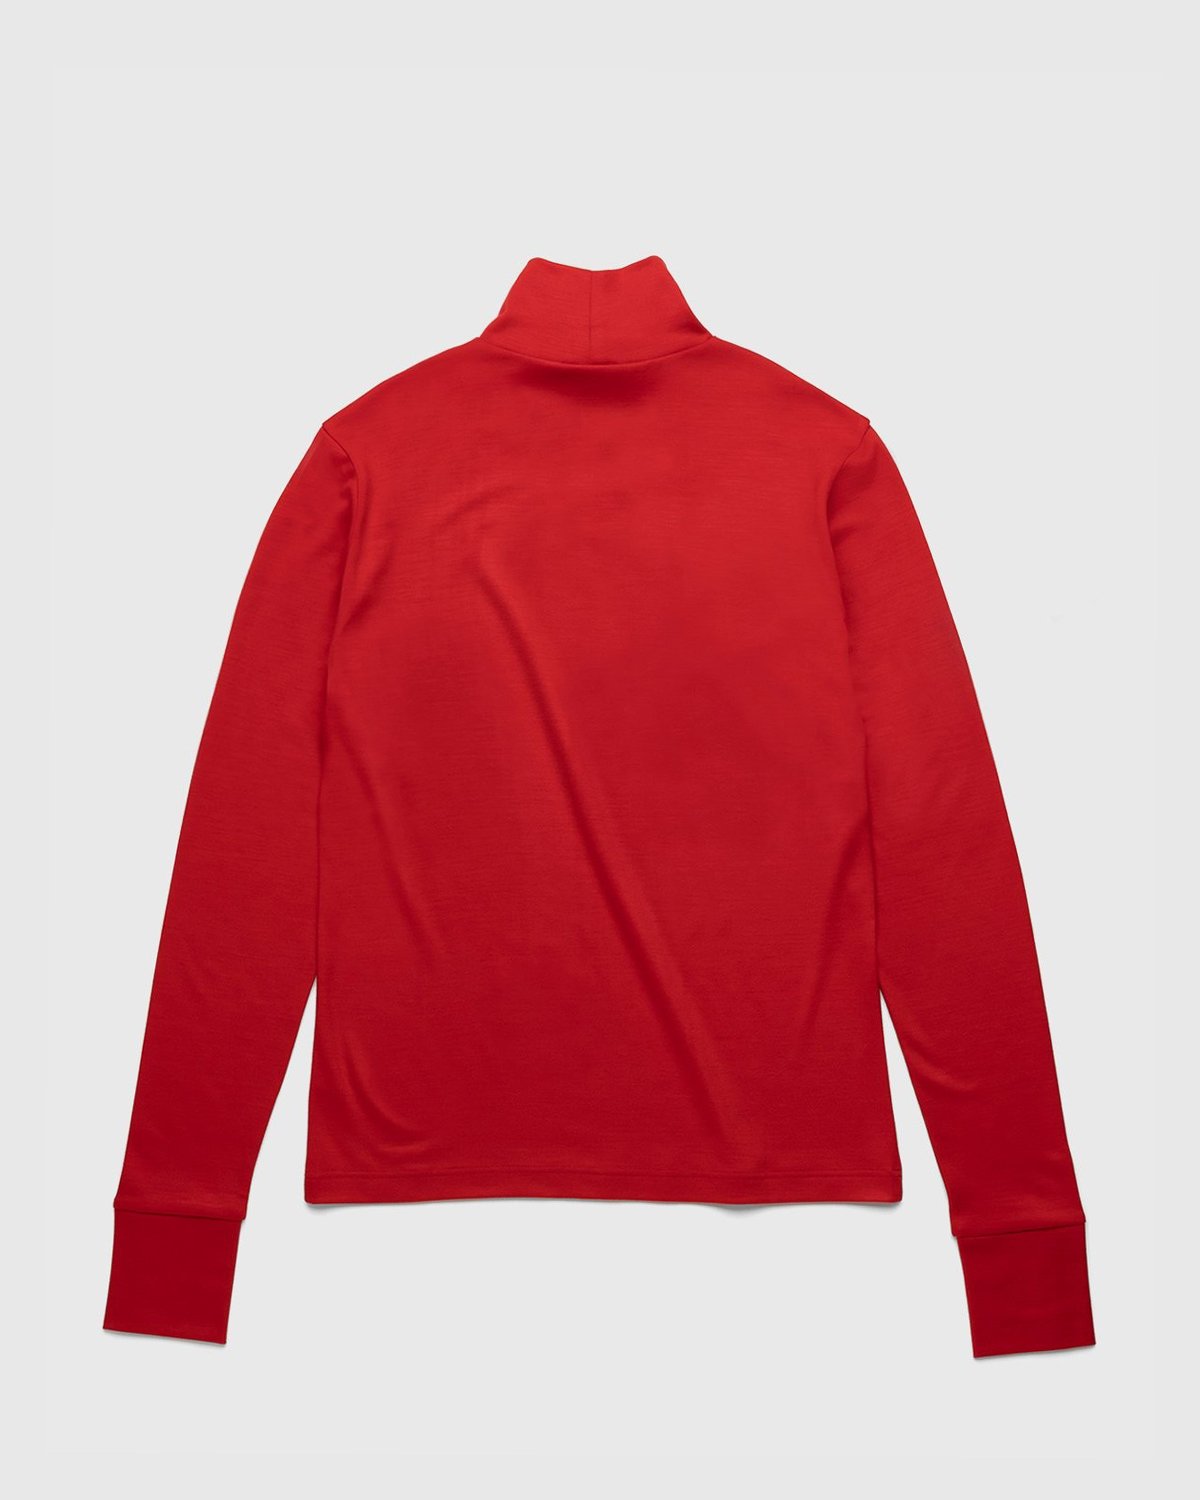 Phipps - Turtleneck Flame - Clothing - Red - Image 2